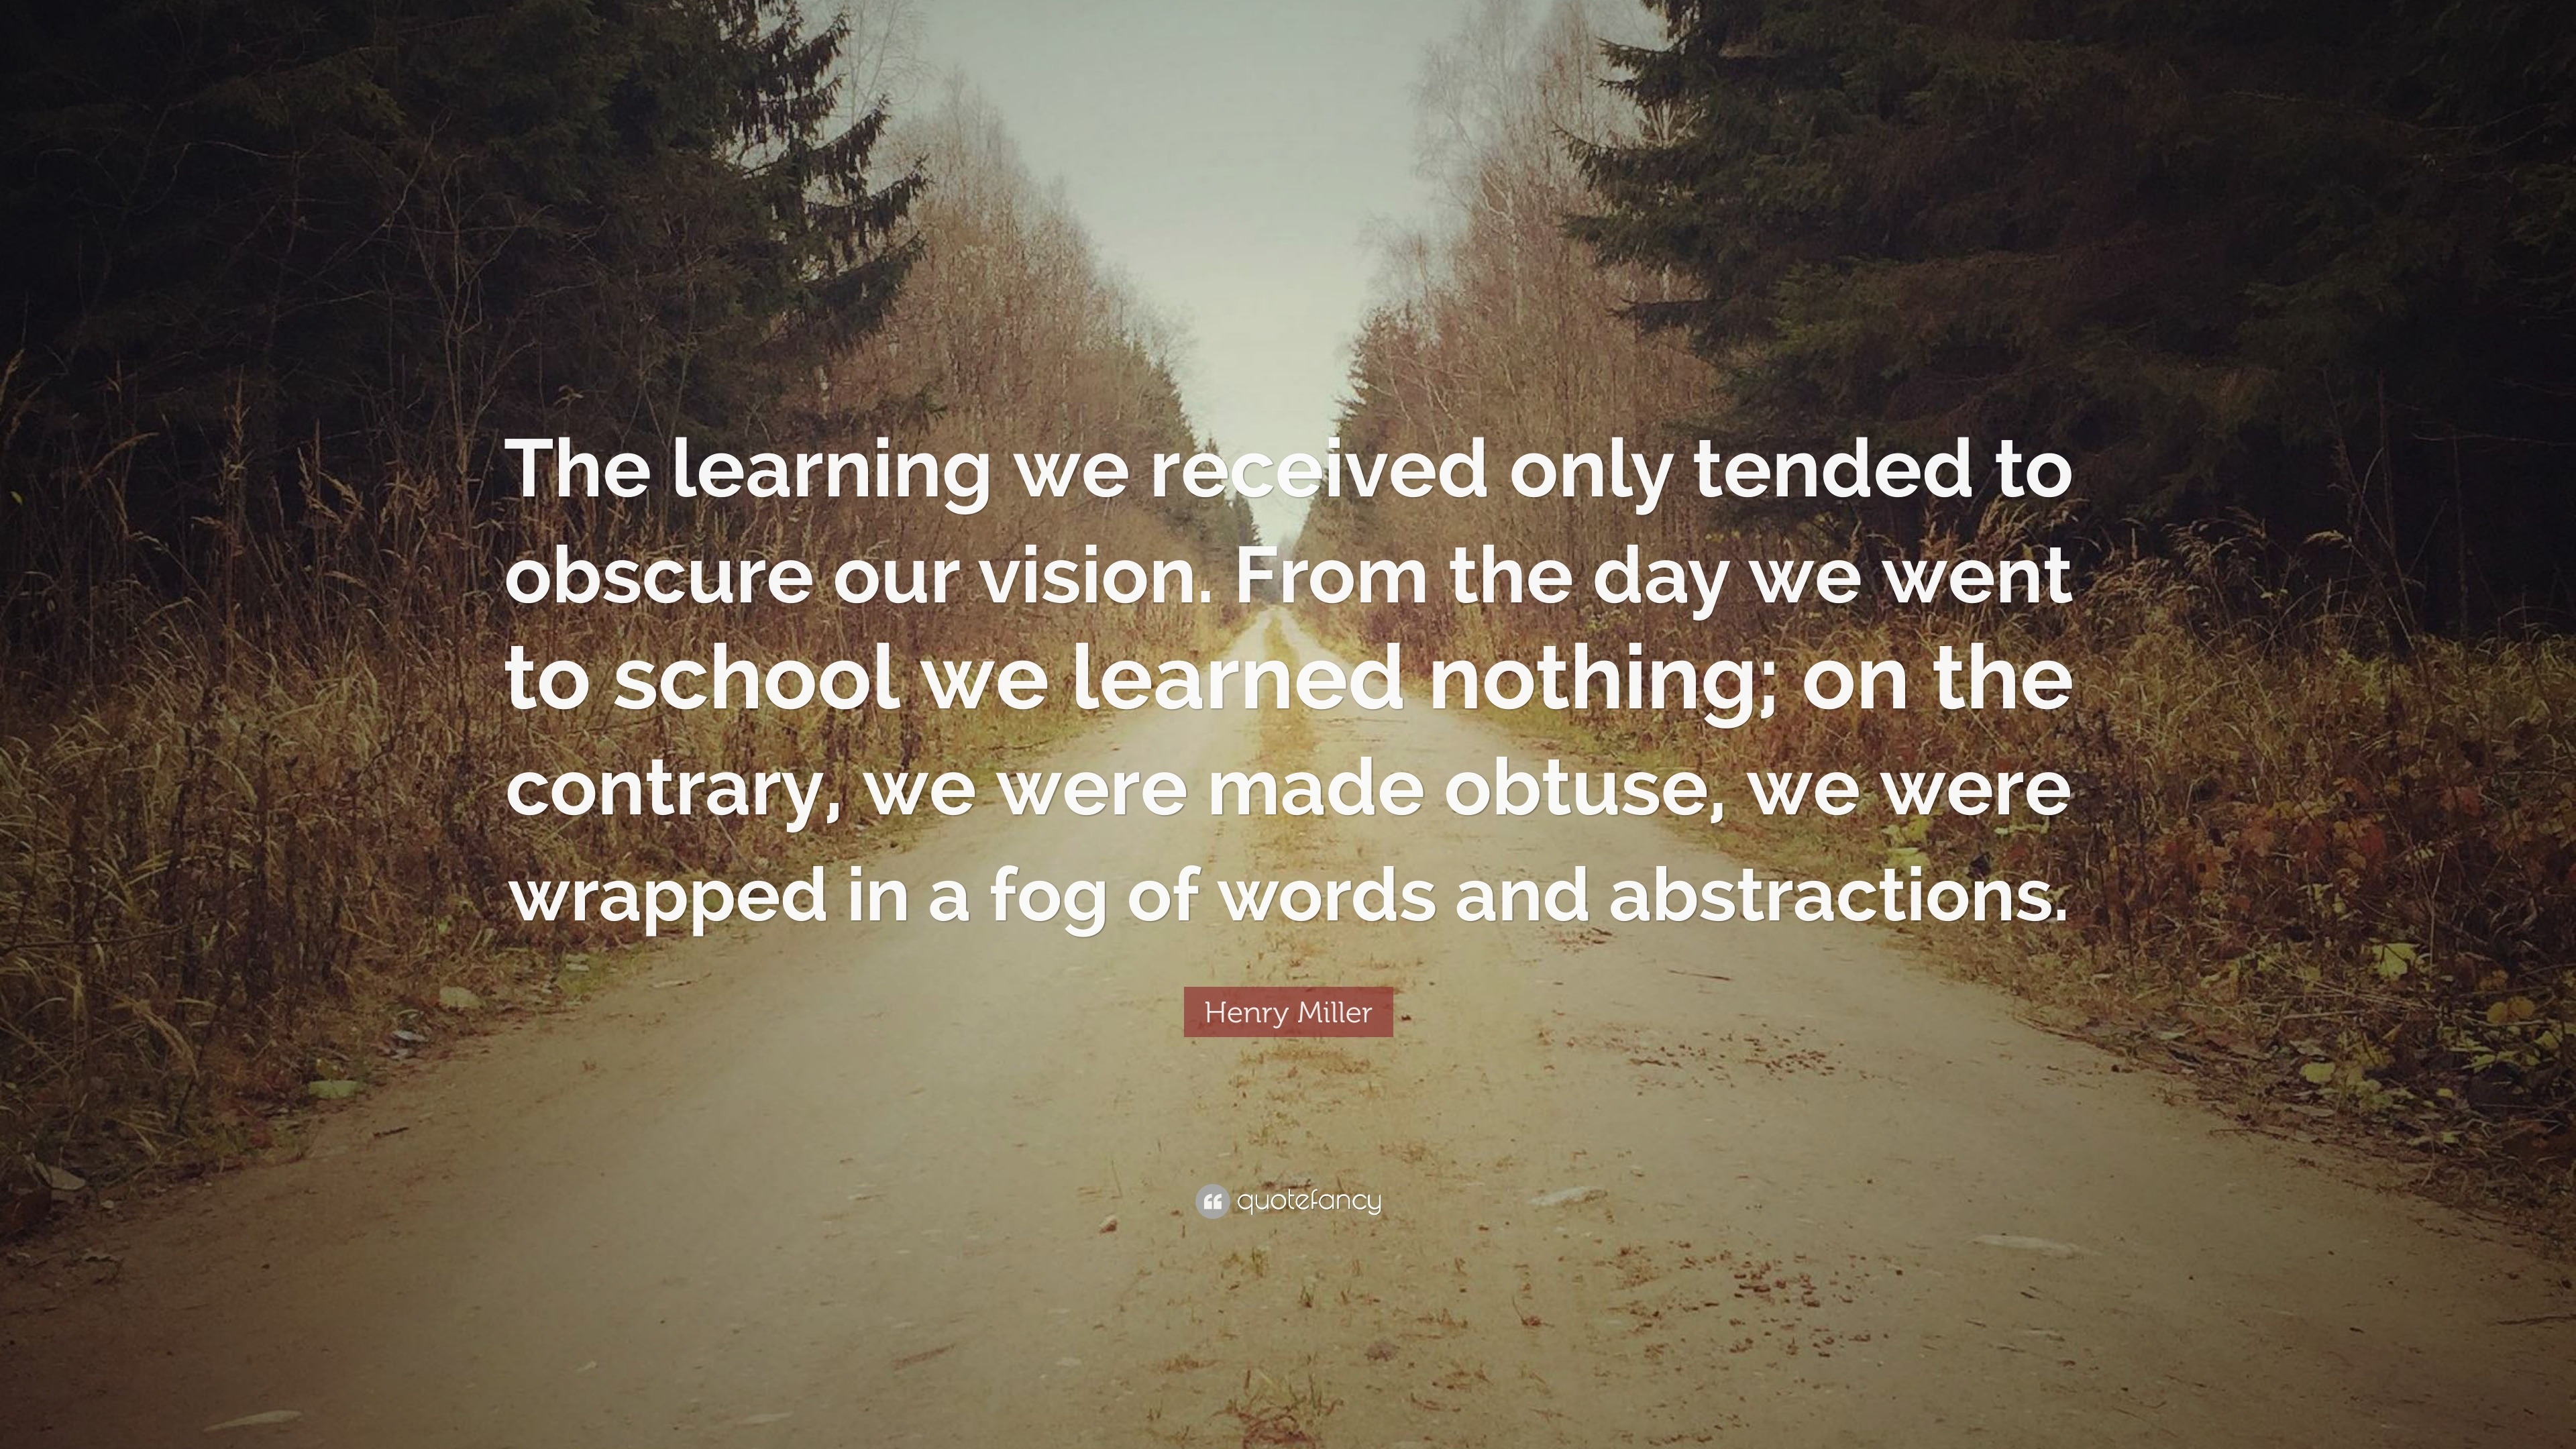 Henry Miller Quote: “The learning we received only tended to obscure ...